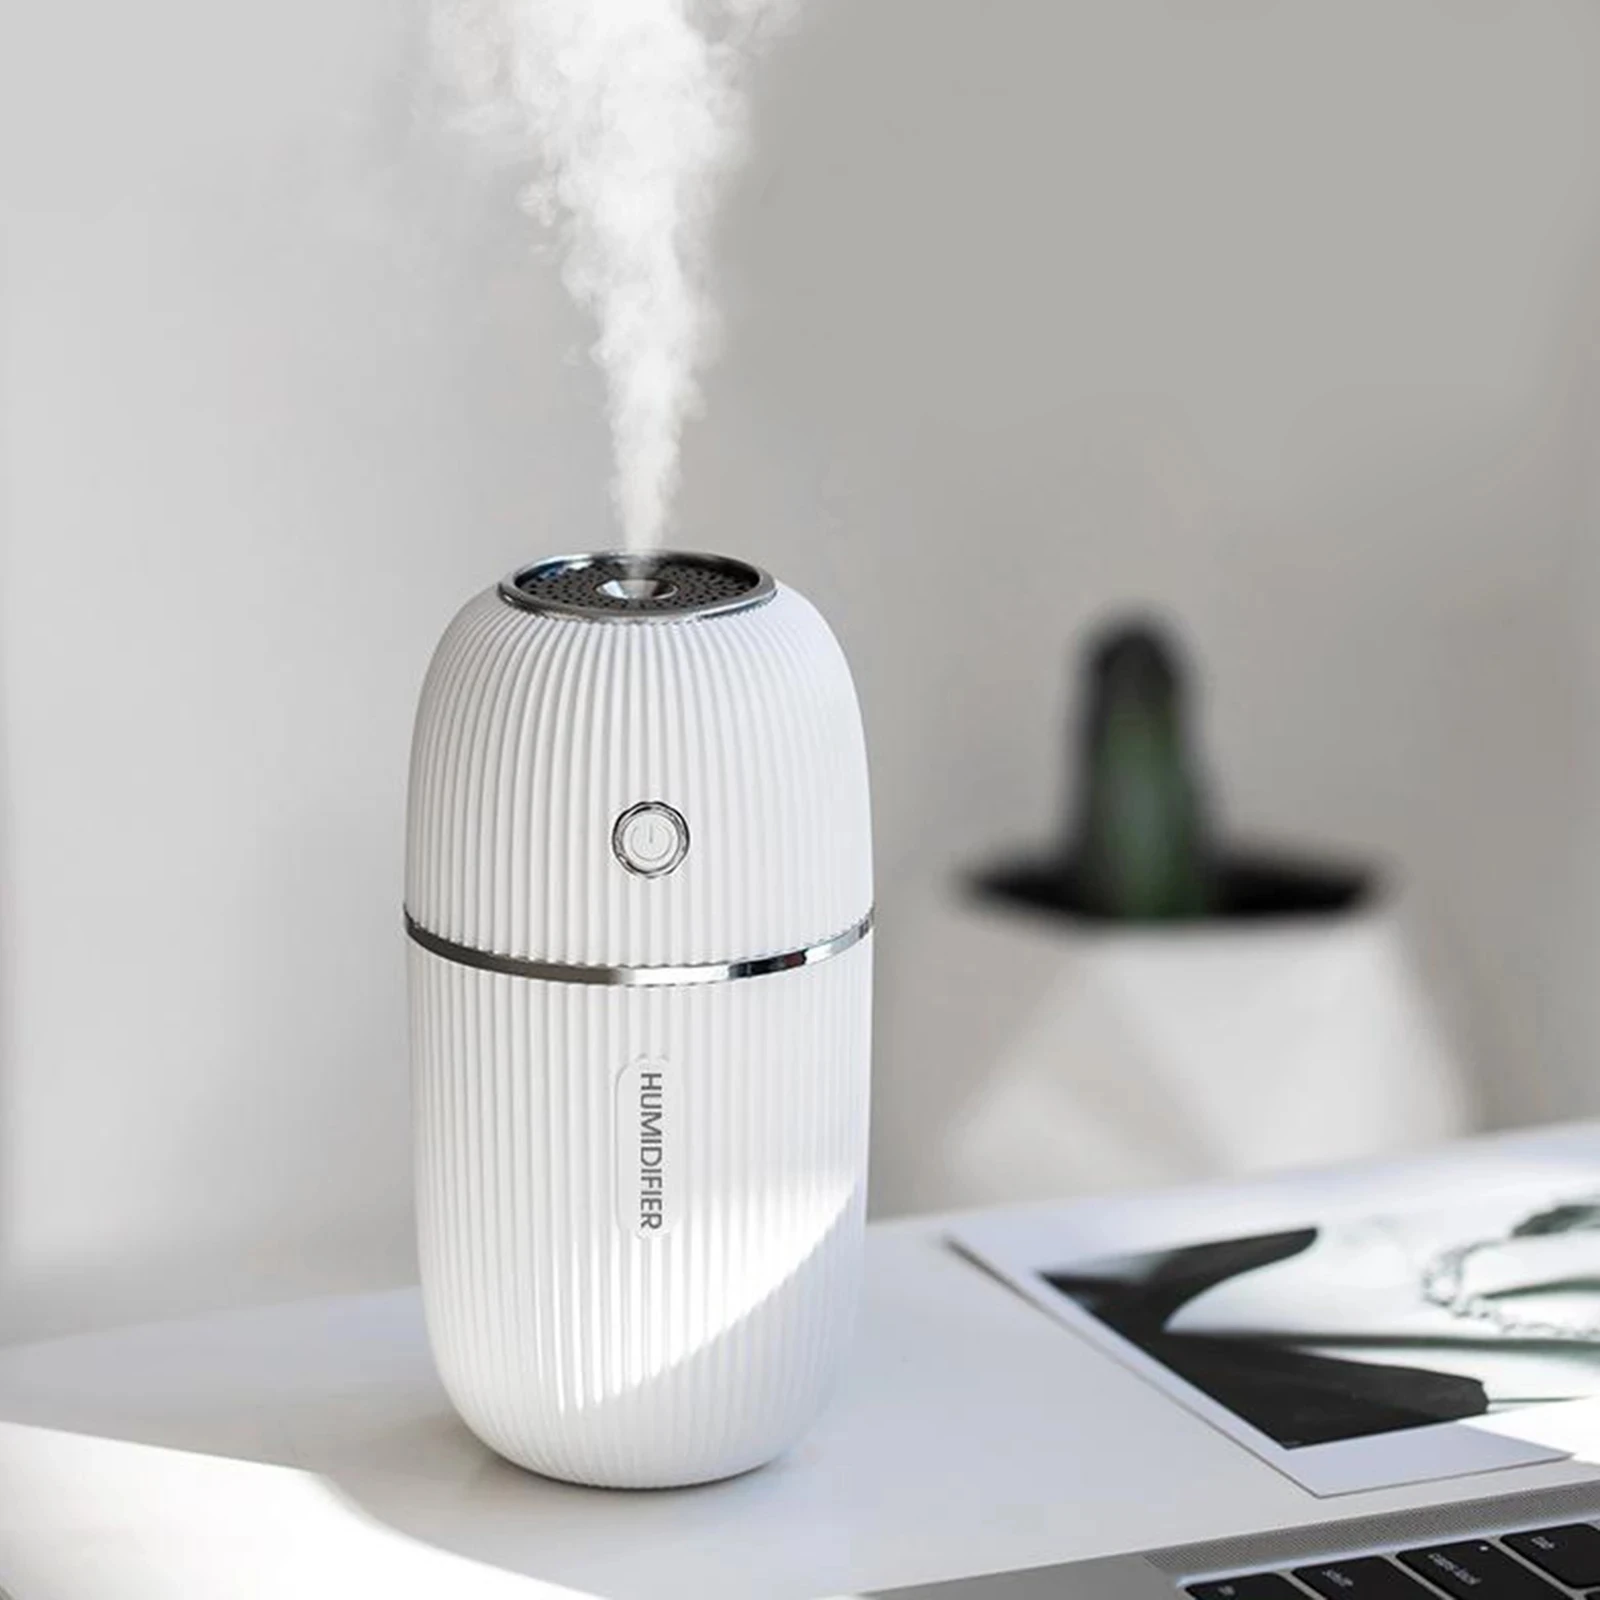 300ml Mini Air Humidifiers Portable Air Purifier Mist Sprayer Essential Oil Aroma Diffuser for Home Car with Colorful Light